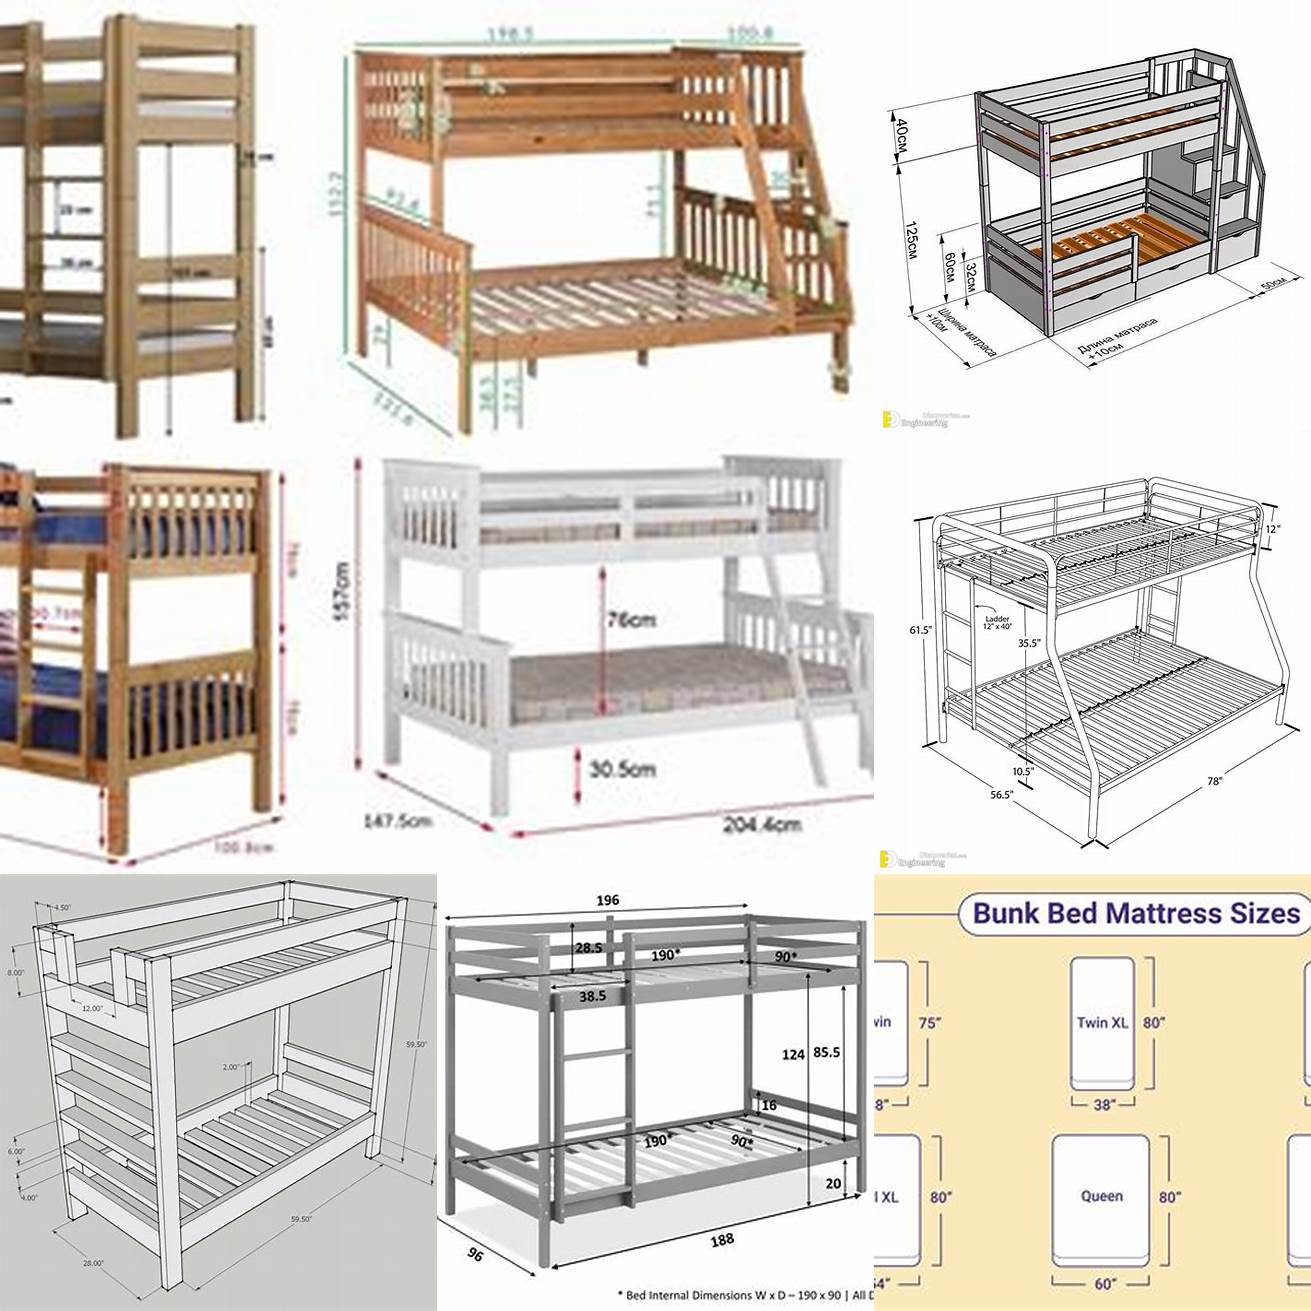 Size Make sure the bunk bed is the right size for your boys and the room